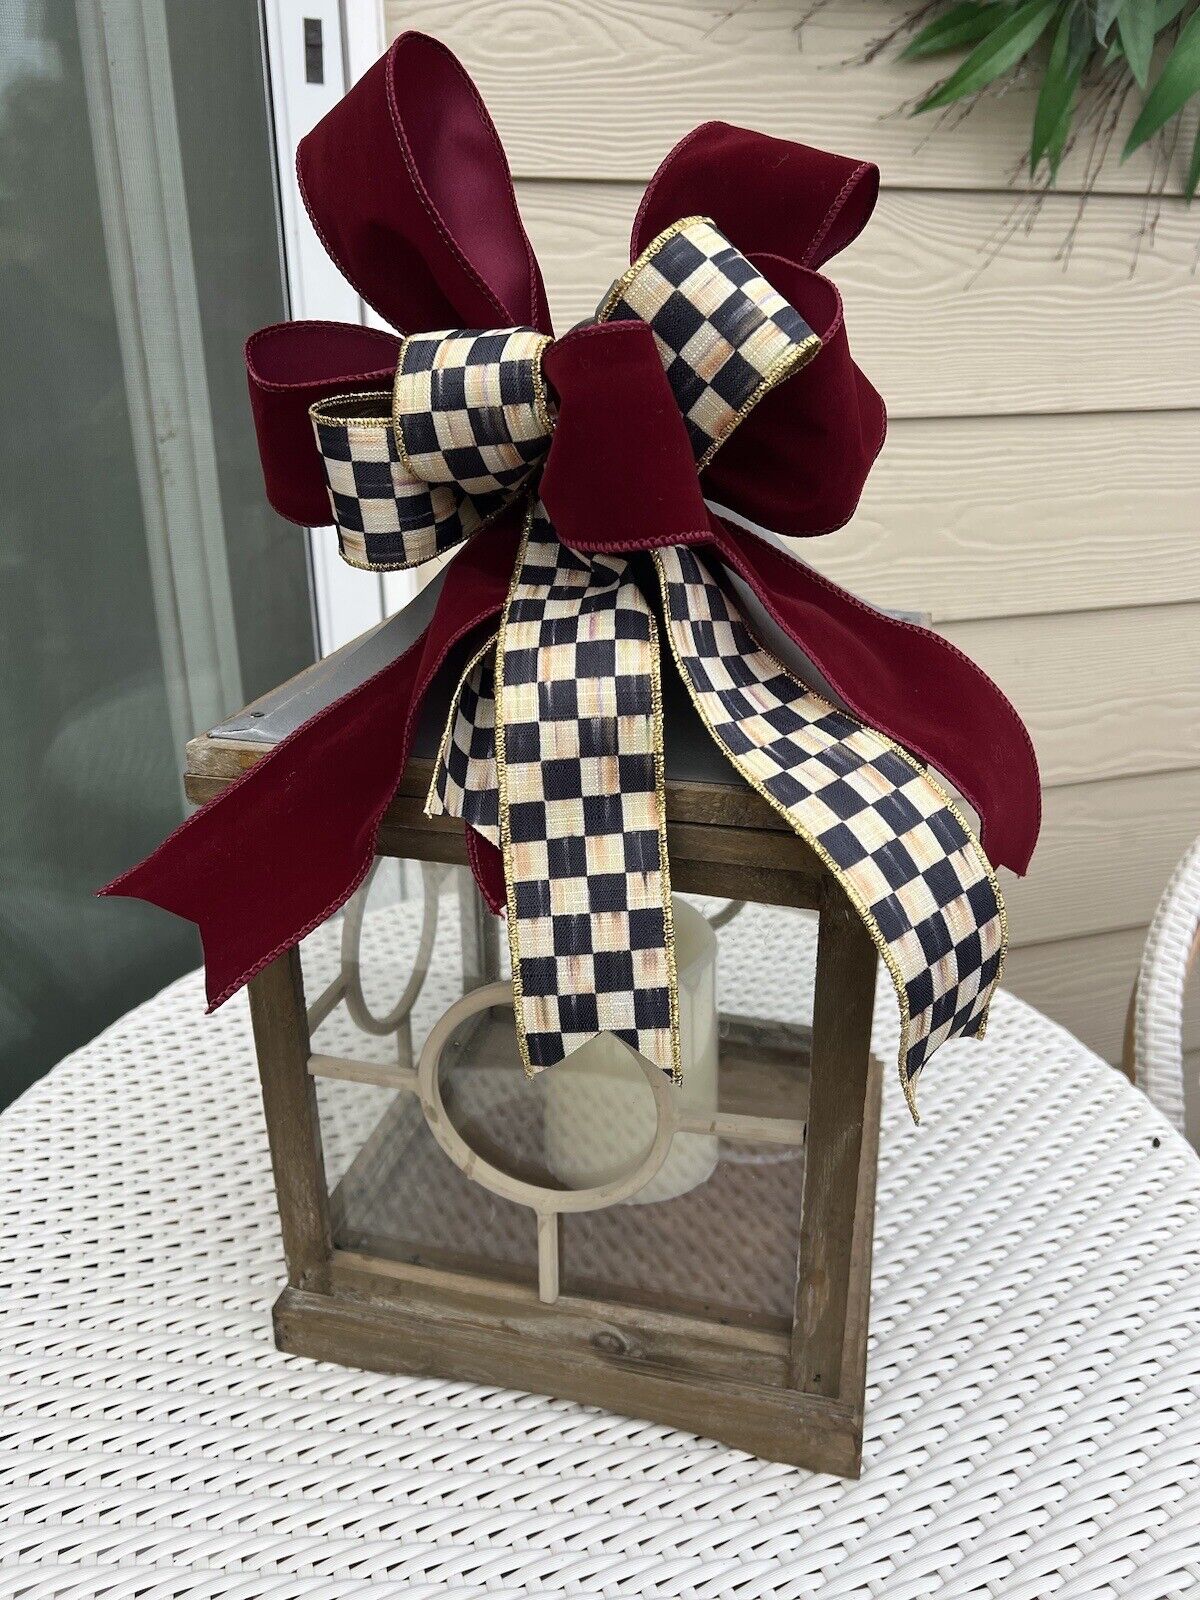 Mackenzie childs courtly check bow | Handmade Bow  Lantern Topper